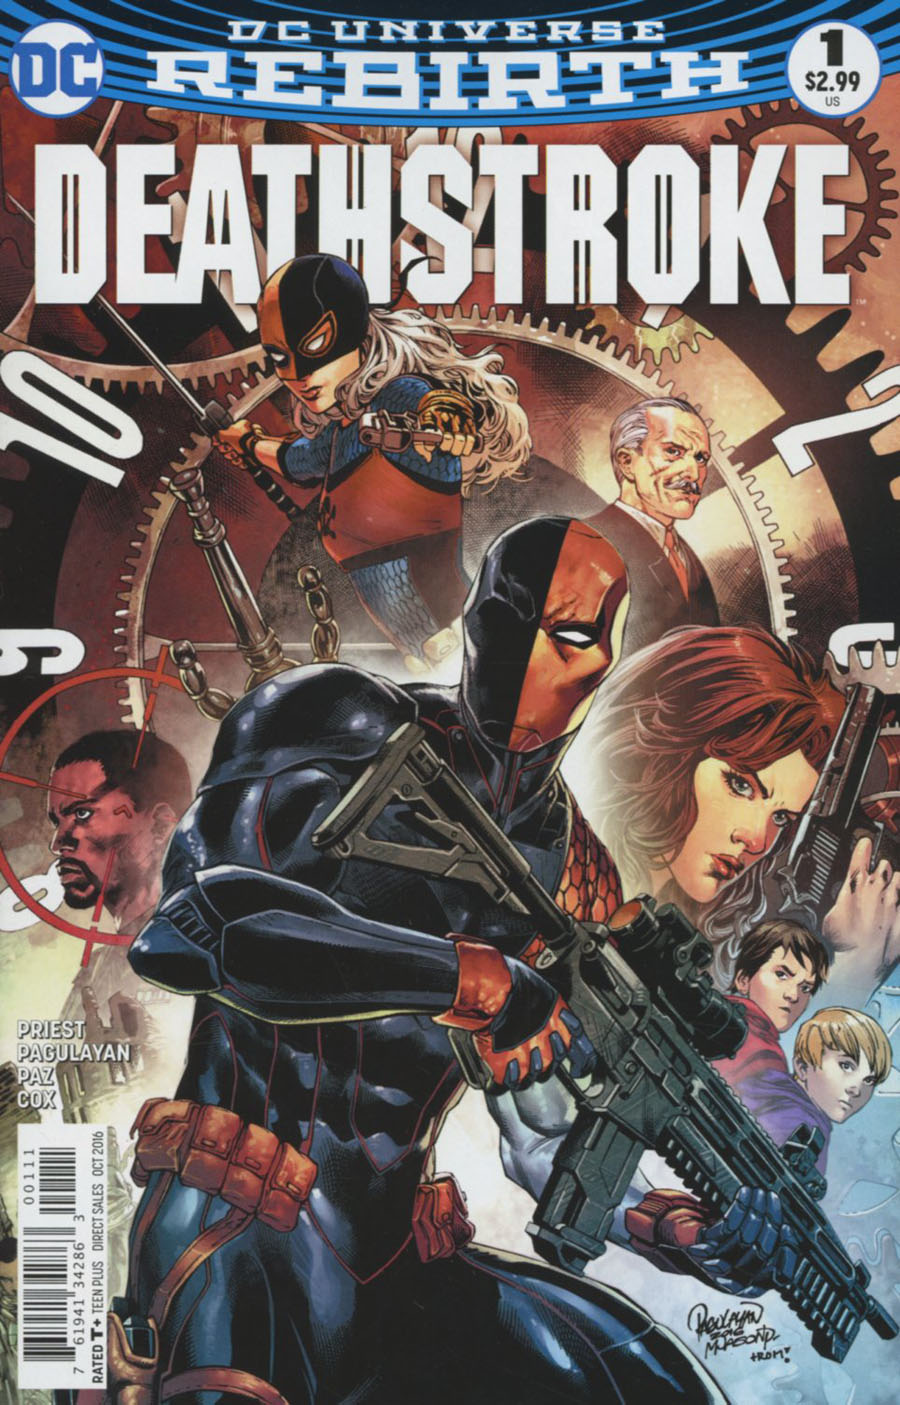 Deathstroke Vol 4 #1 Cover A Regular Carlo Pagulayan Cover